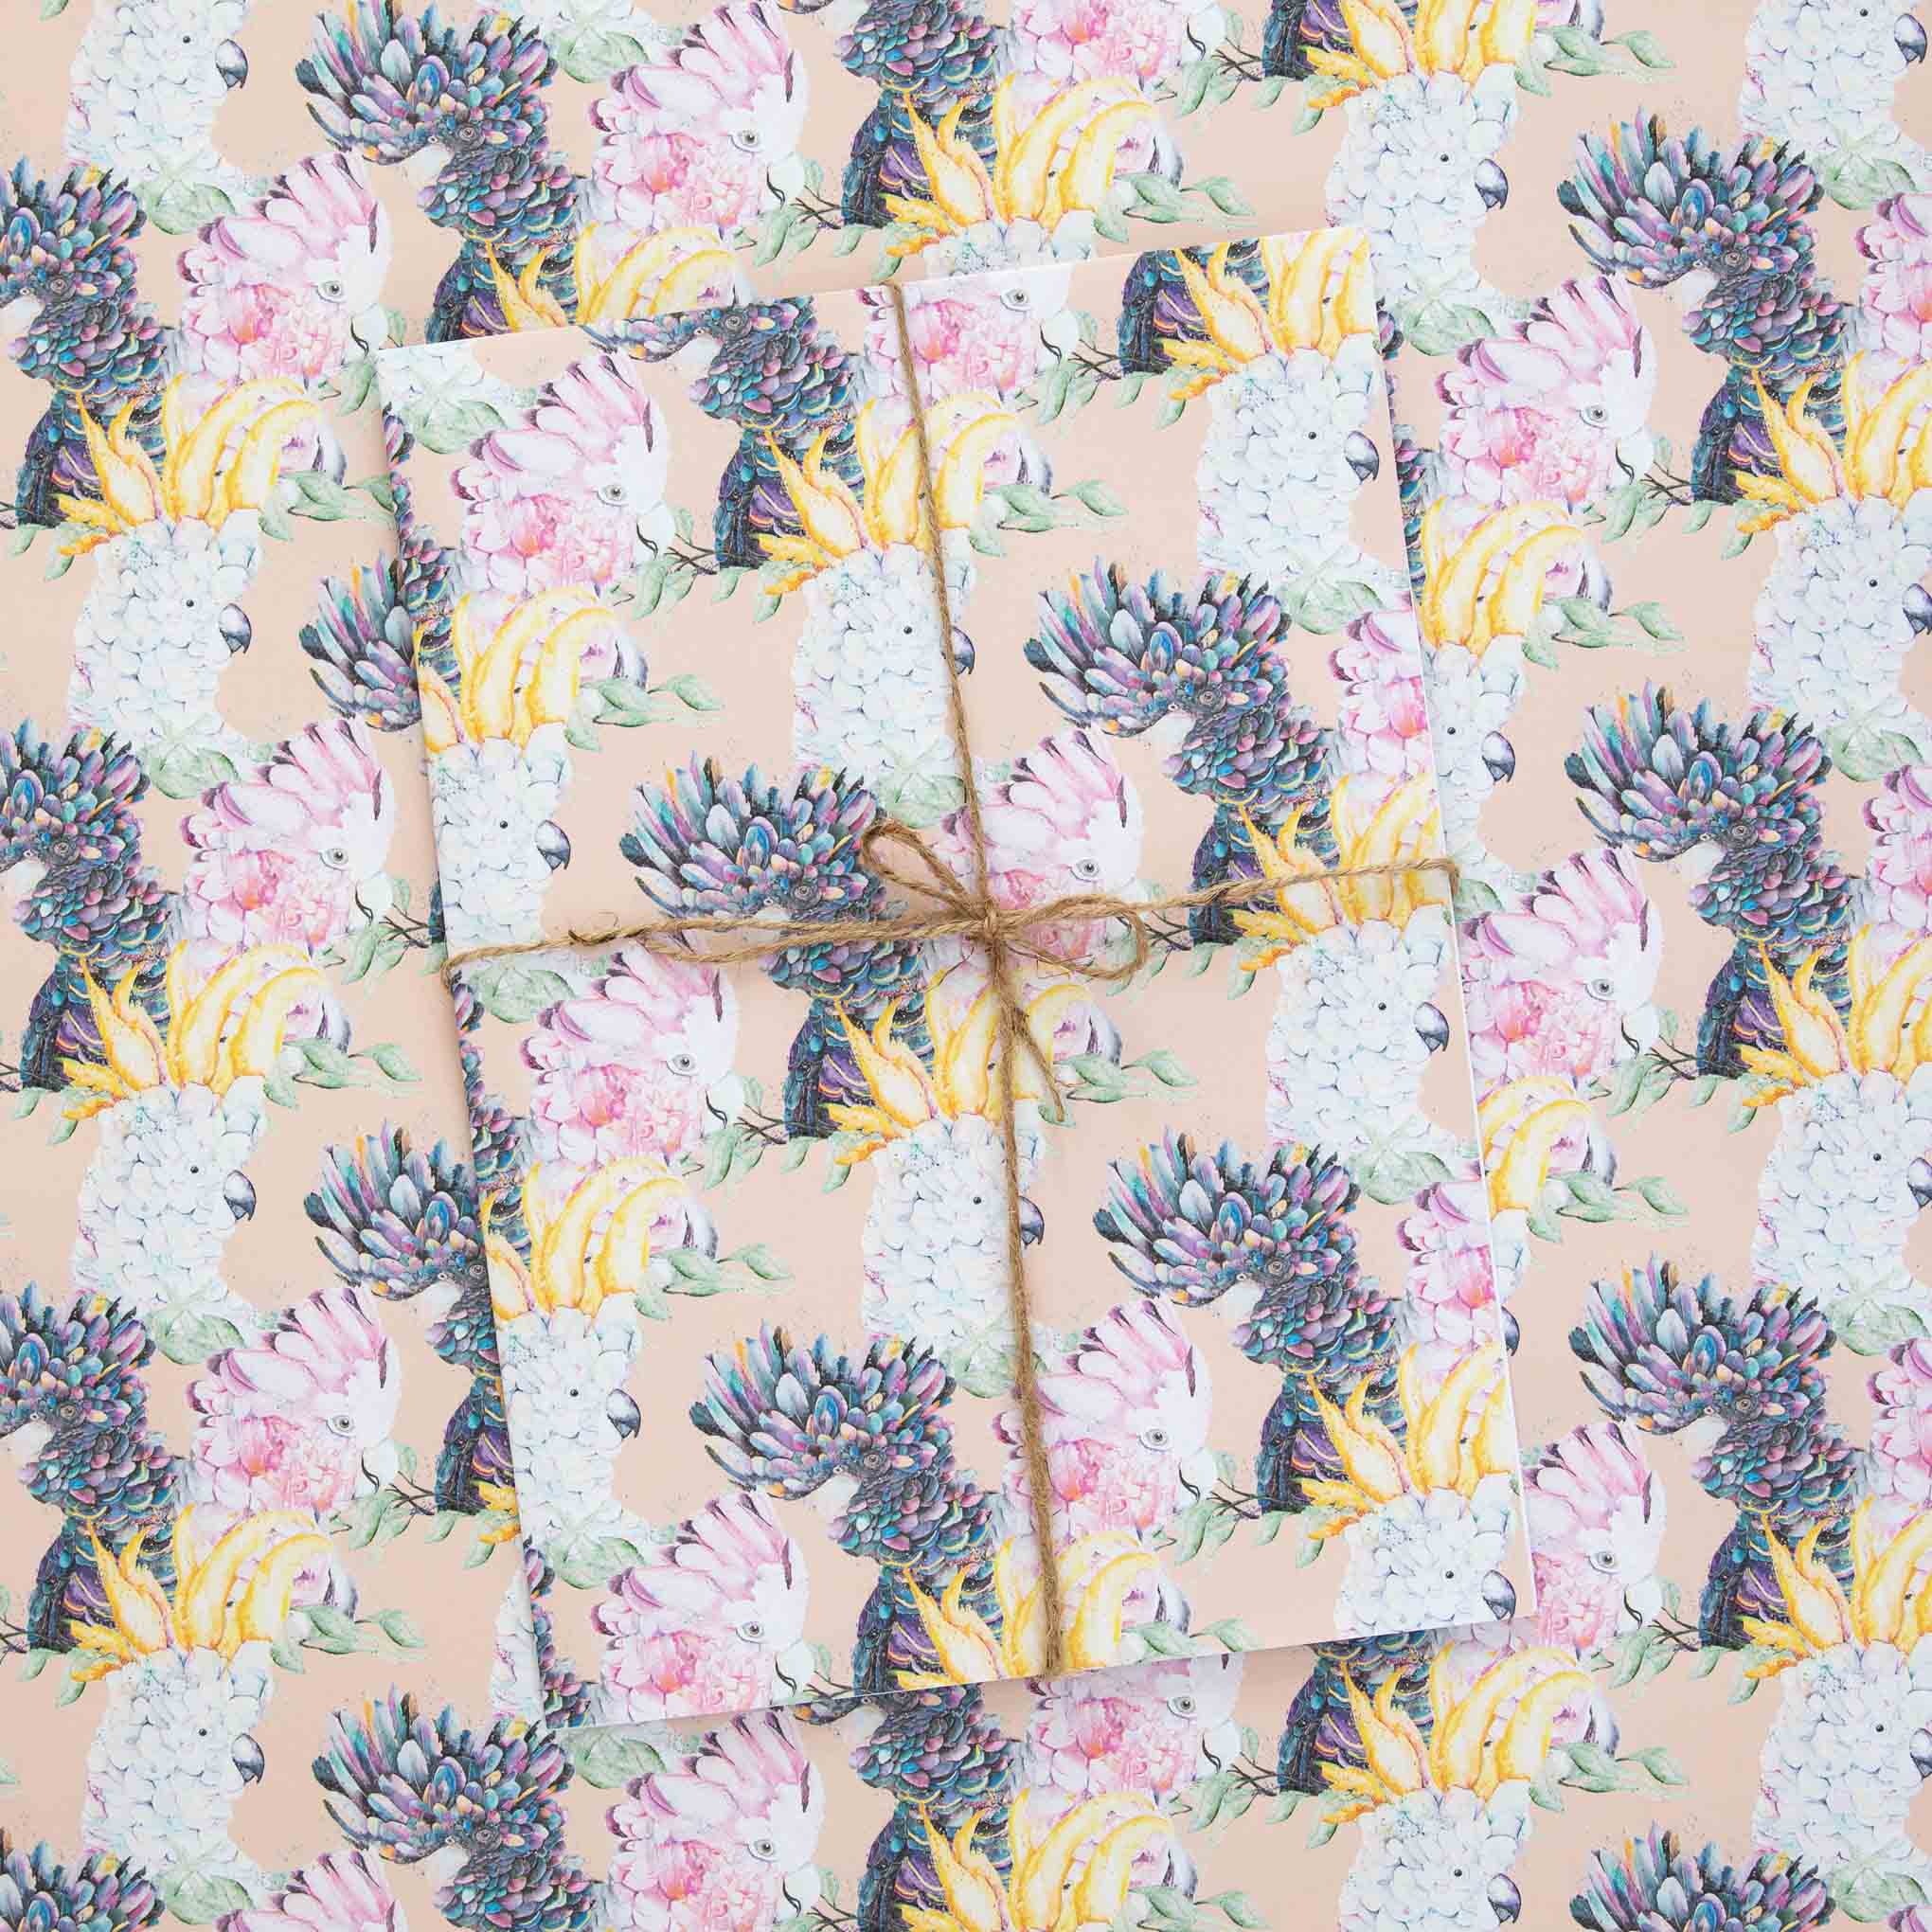 Cockatoos & Galahs Wrapping Paper